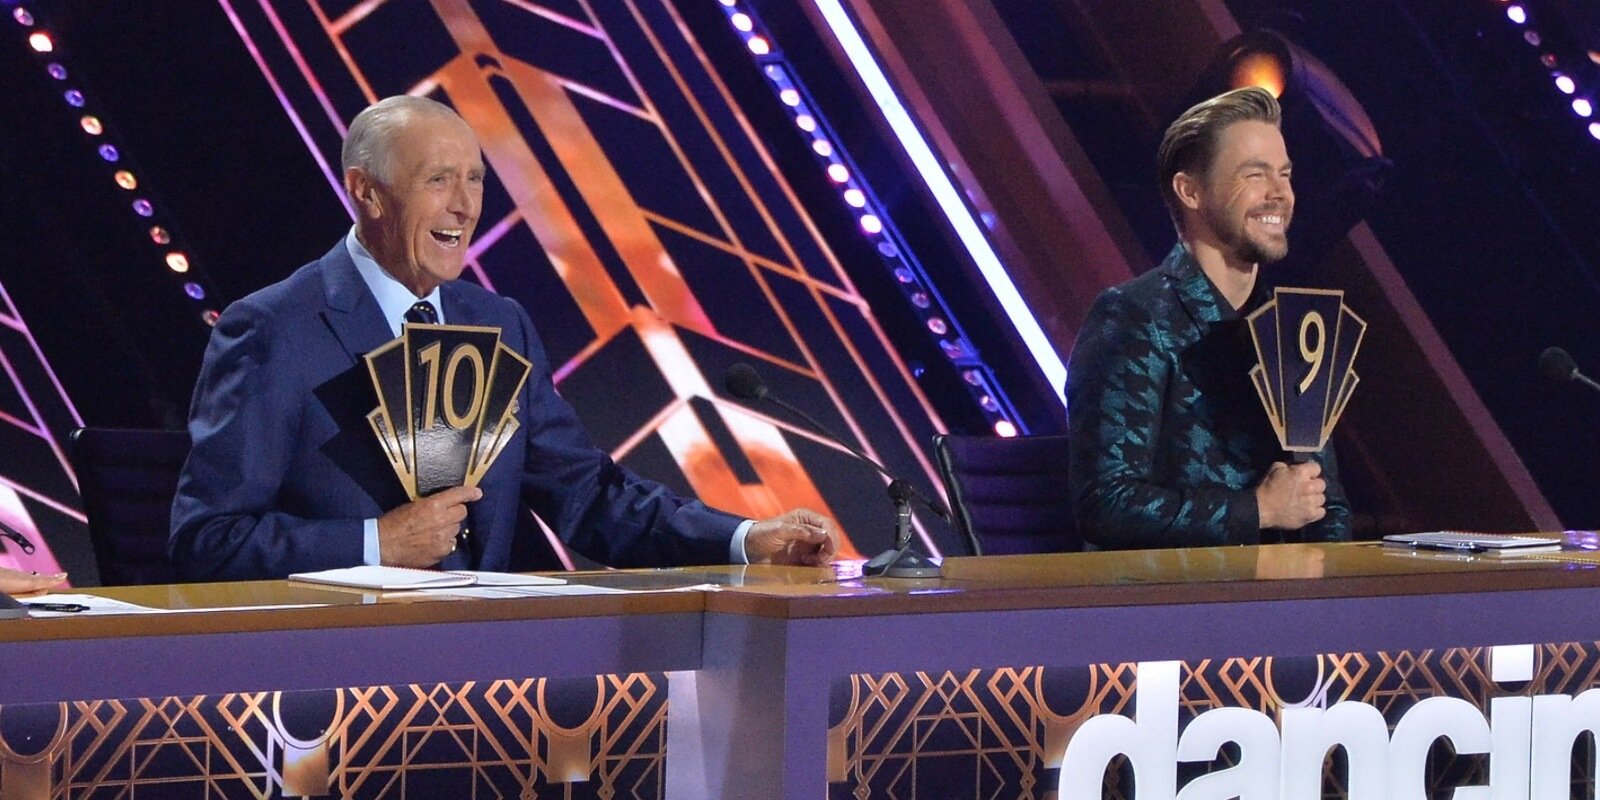 Len Goodman and Derek Hough sat at the judges table of 'DWTS' during season 31.